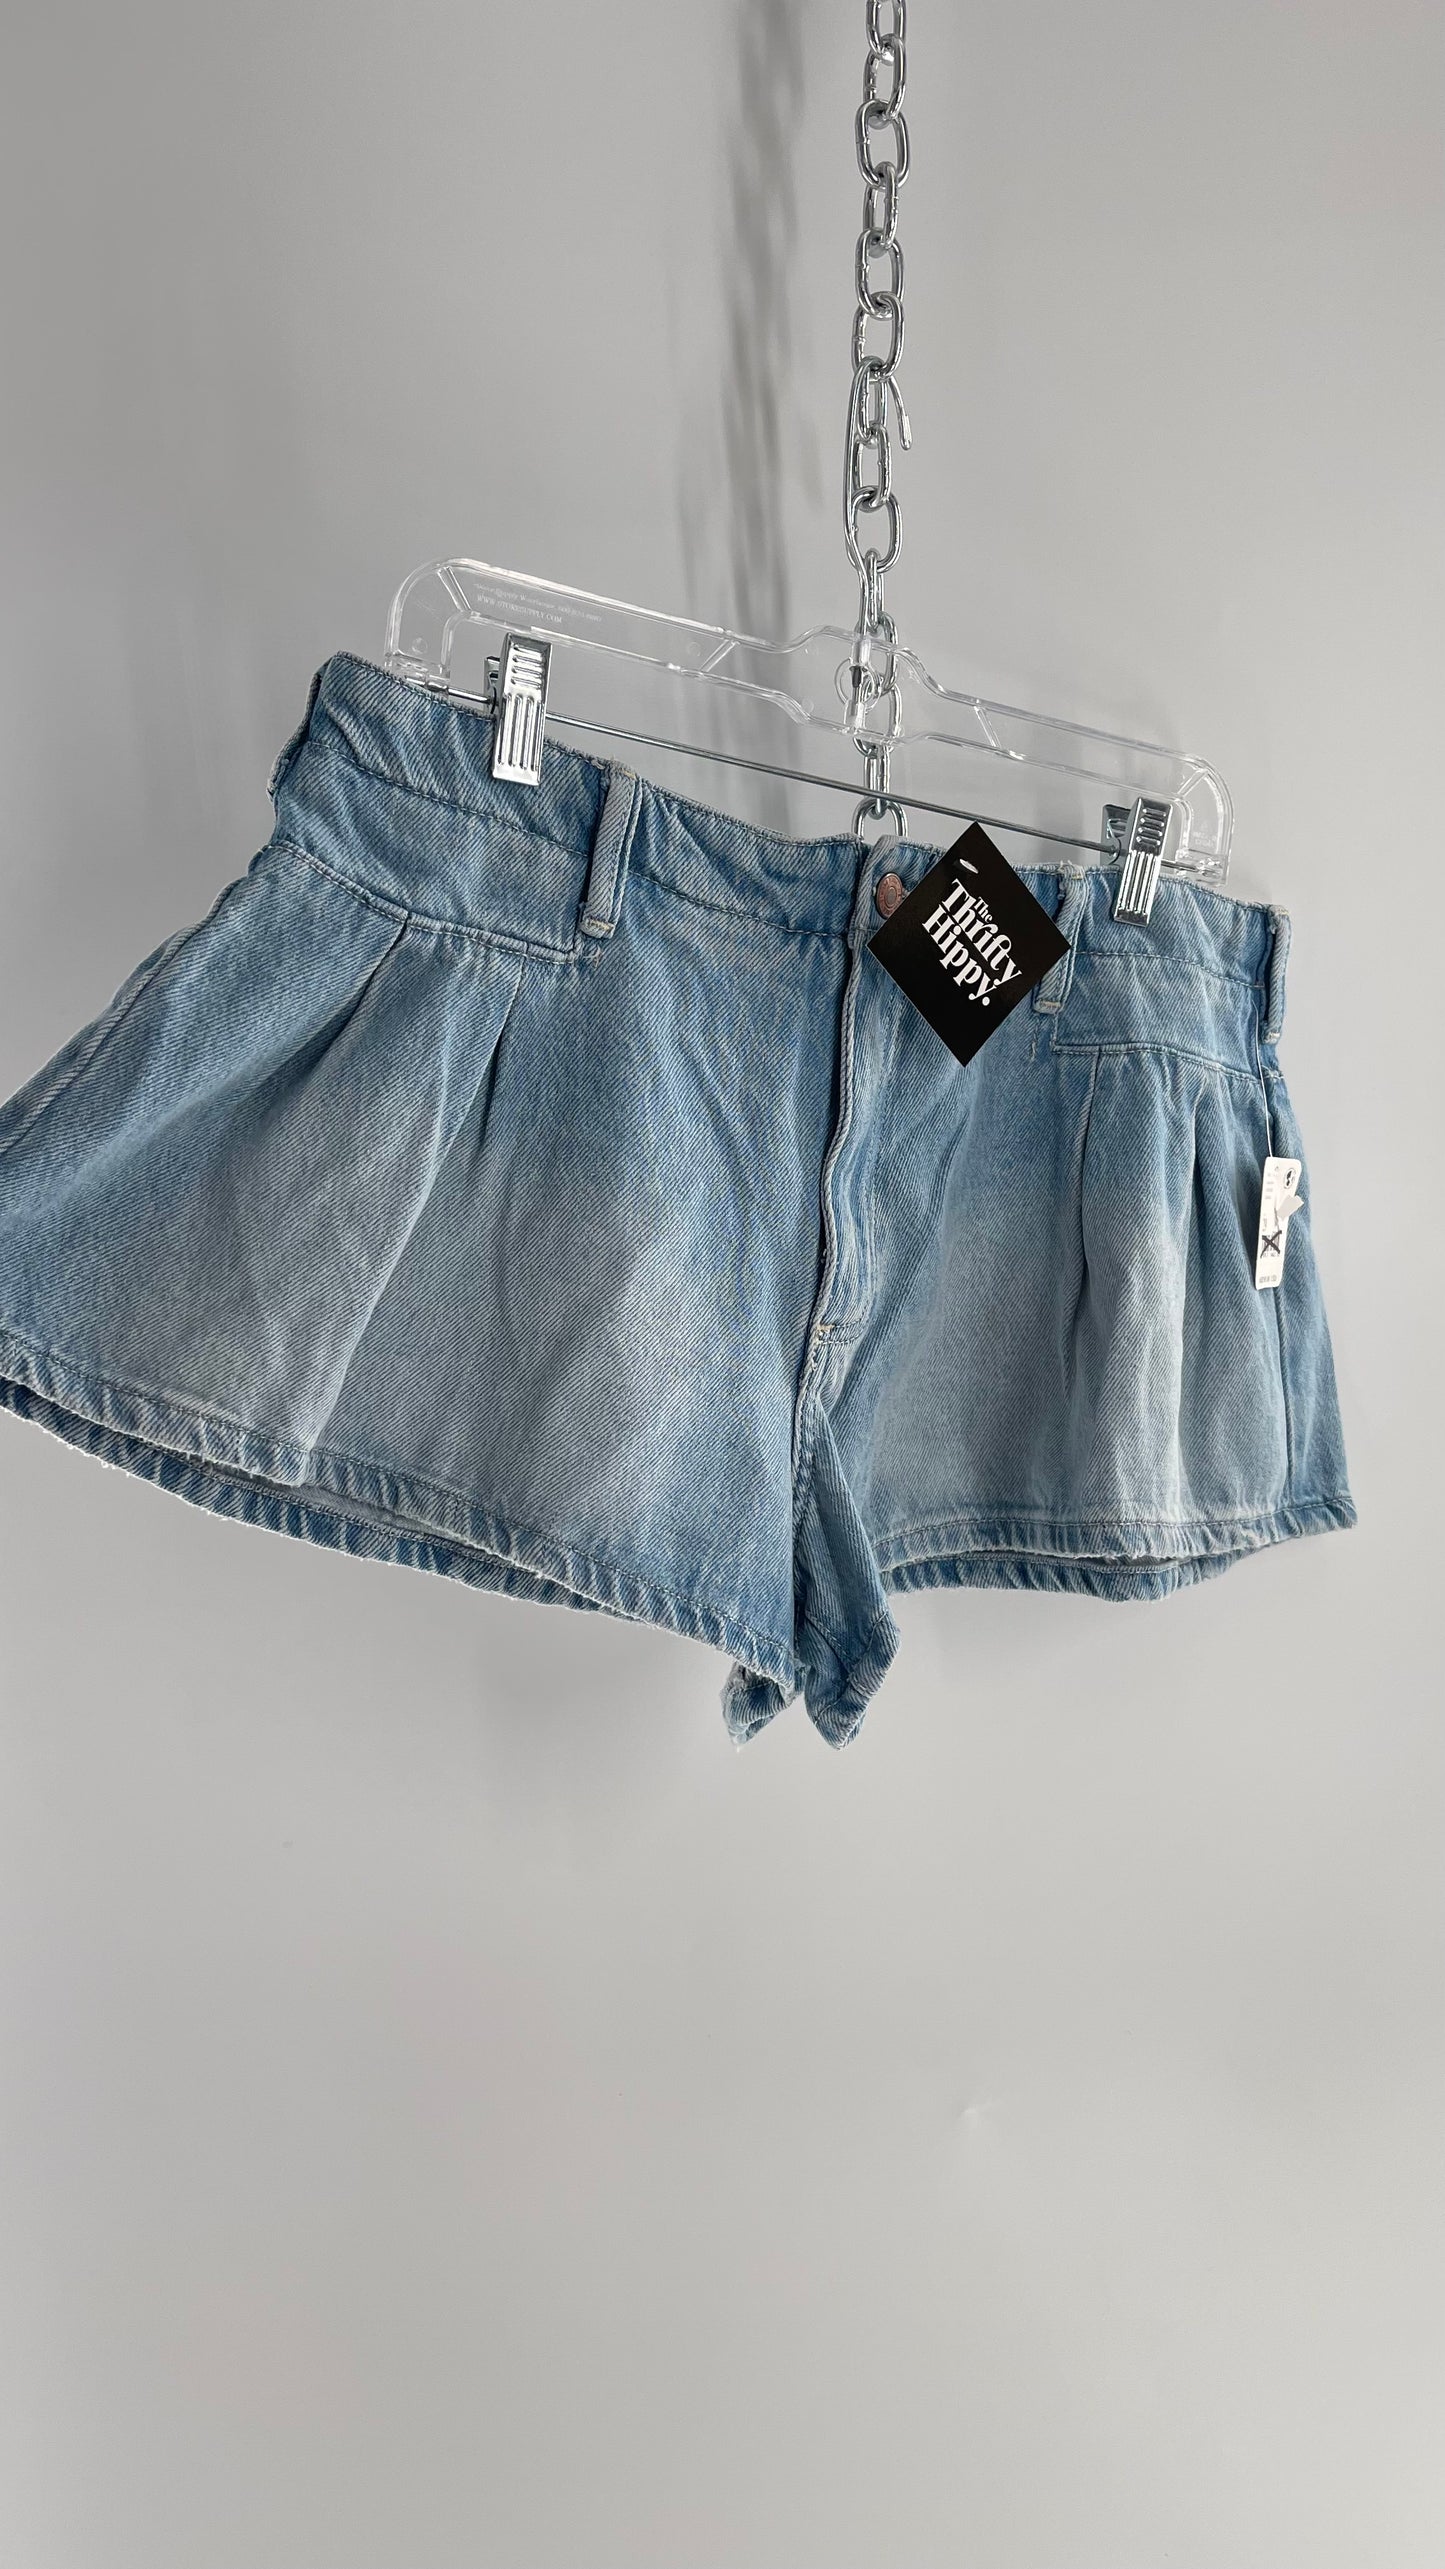 Free People Blue Bell Low Rise Pleated Short with Tags Attached (29)